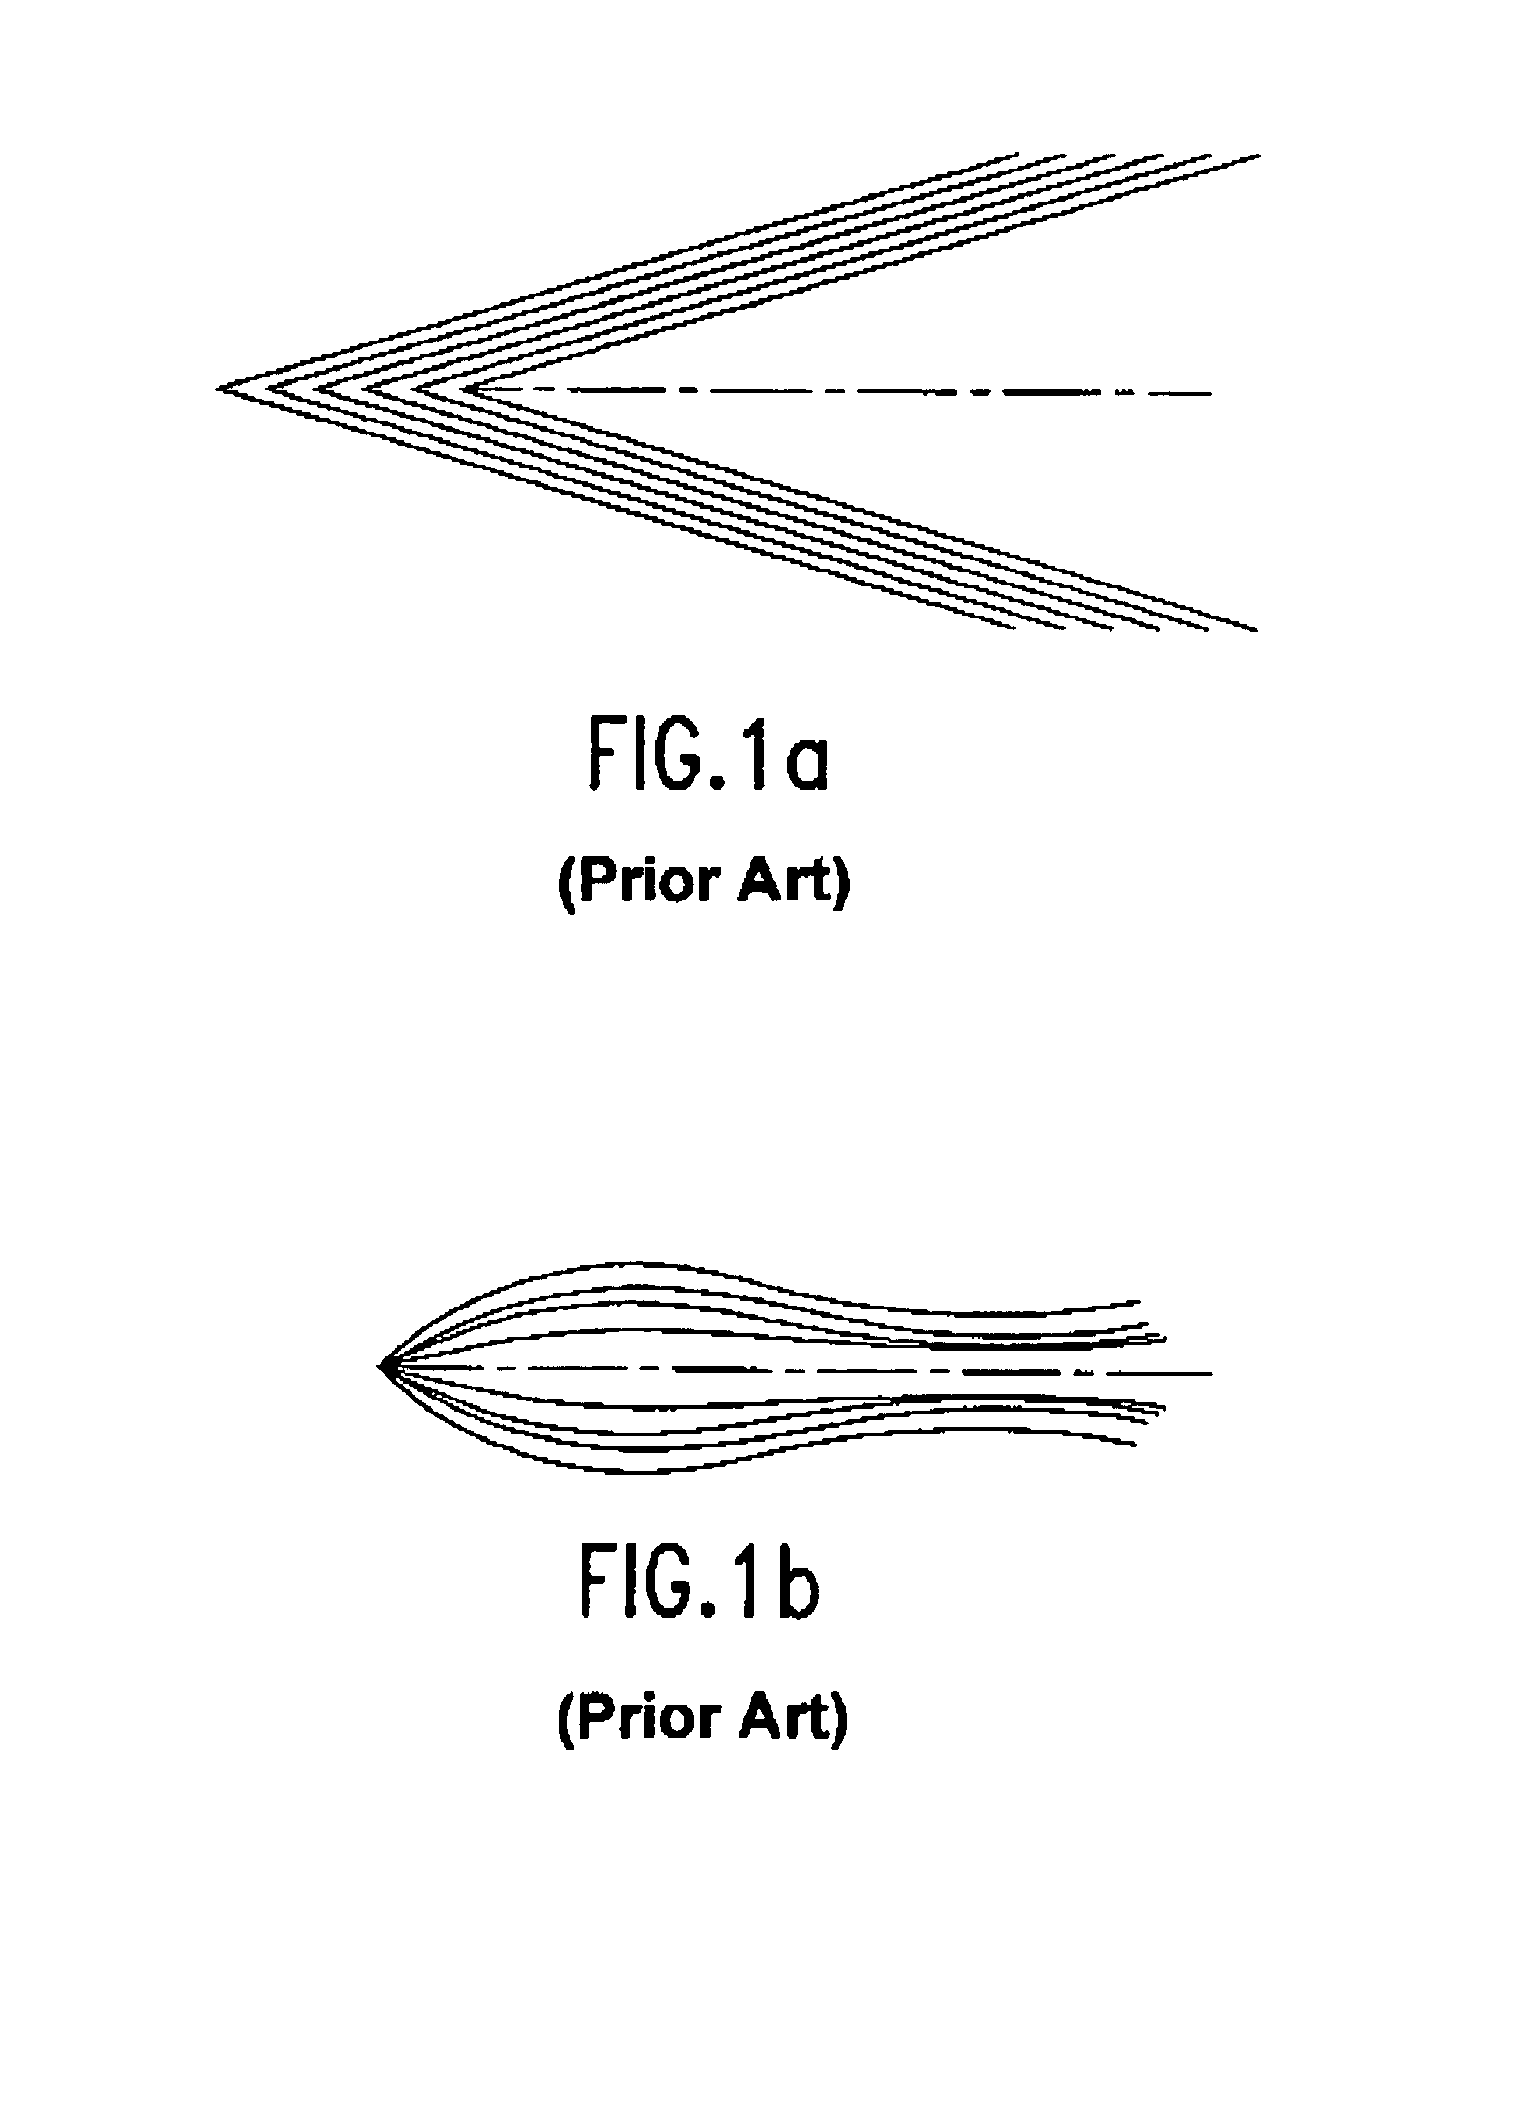 Apparatus and method for creasing media to make booklets